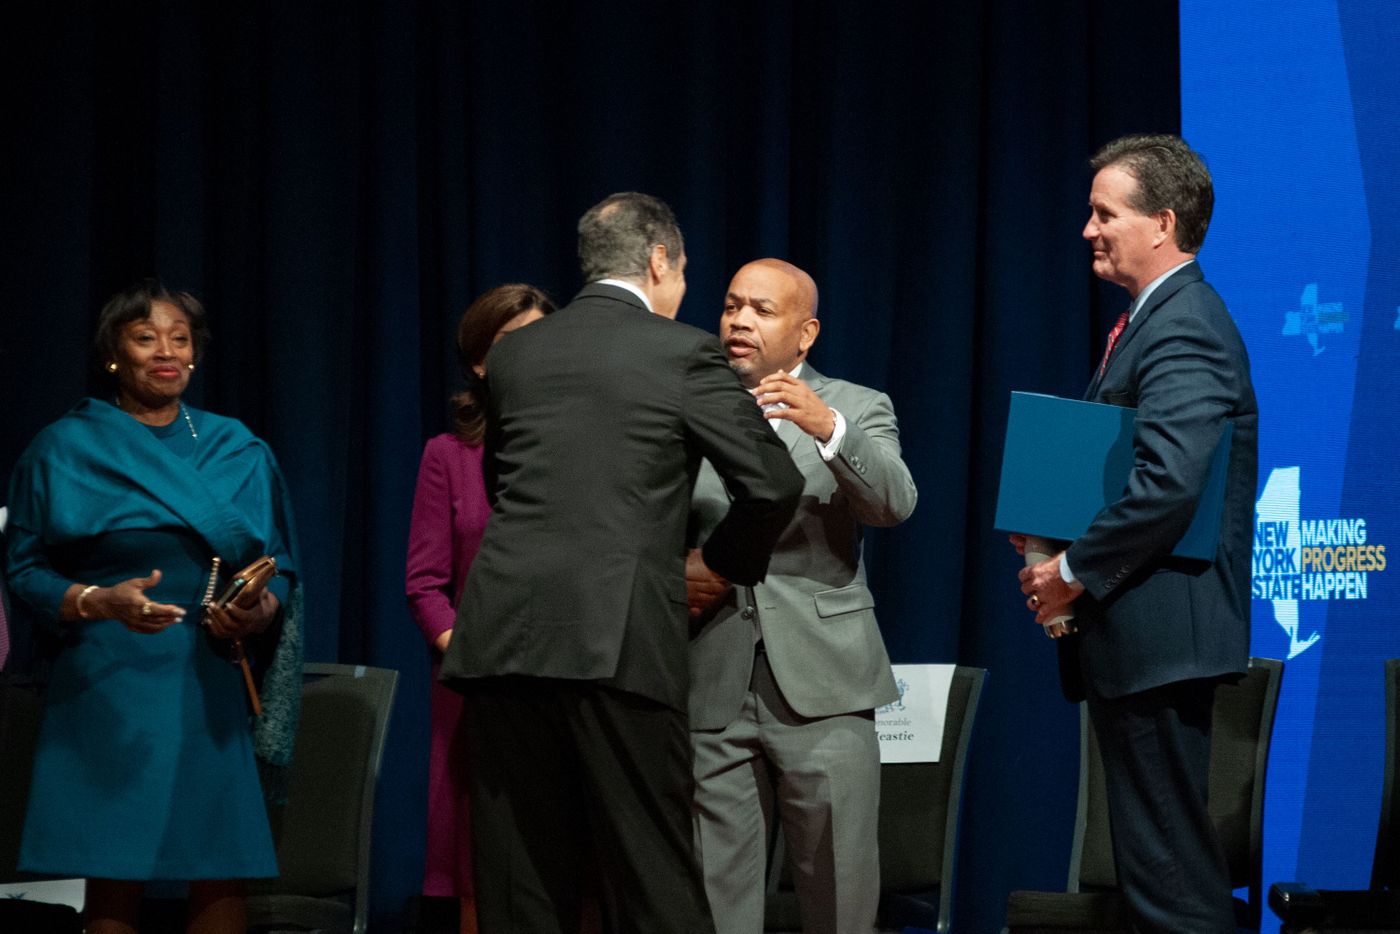 Gov. Andrew Cuomo embraces Assembly Speaker Carl Heastie after delivering his 2020 State of the State address in Albany, Jan. 8, 2020.